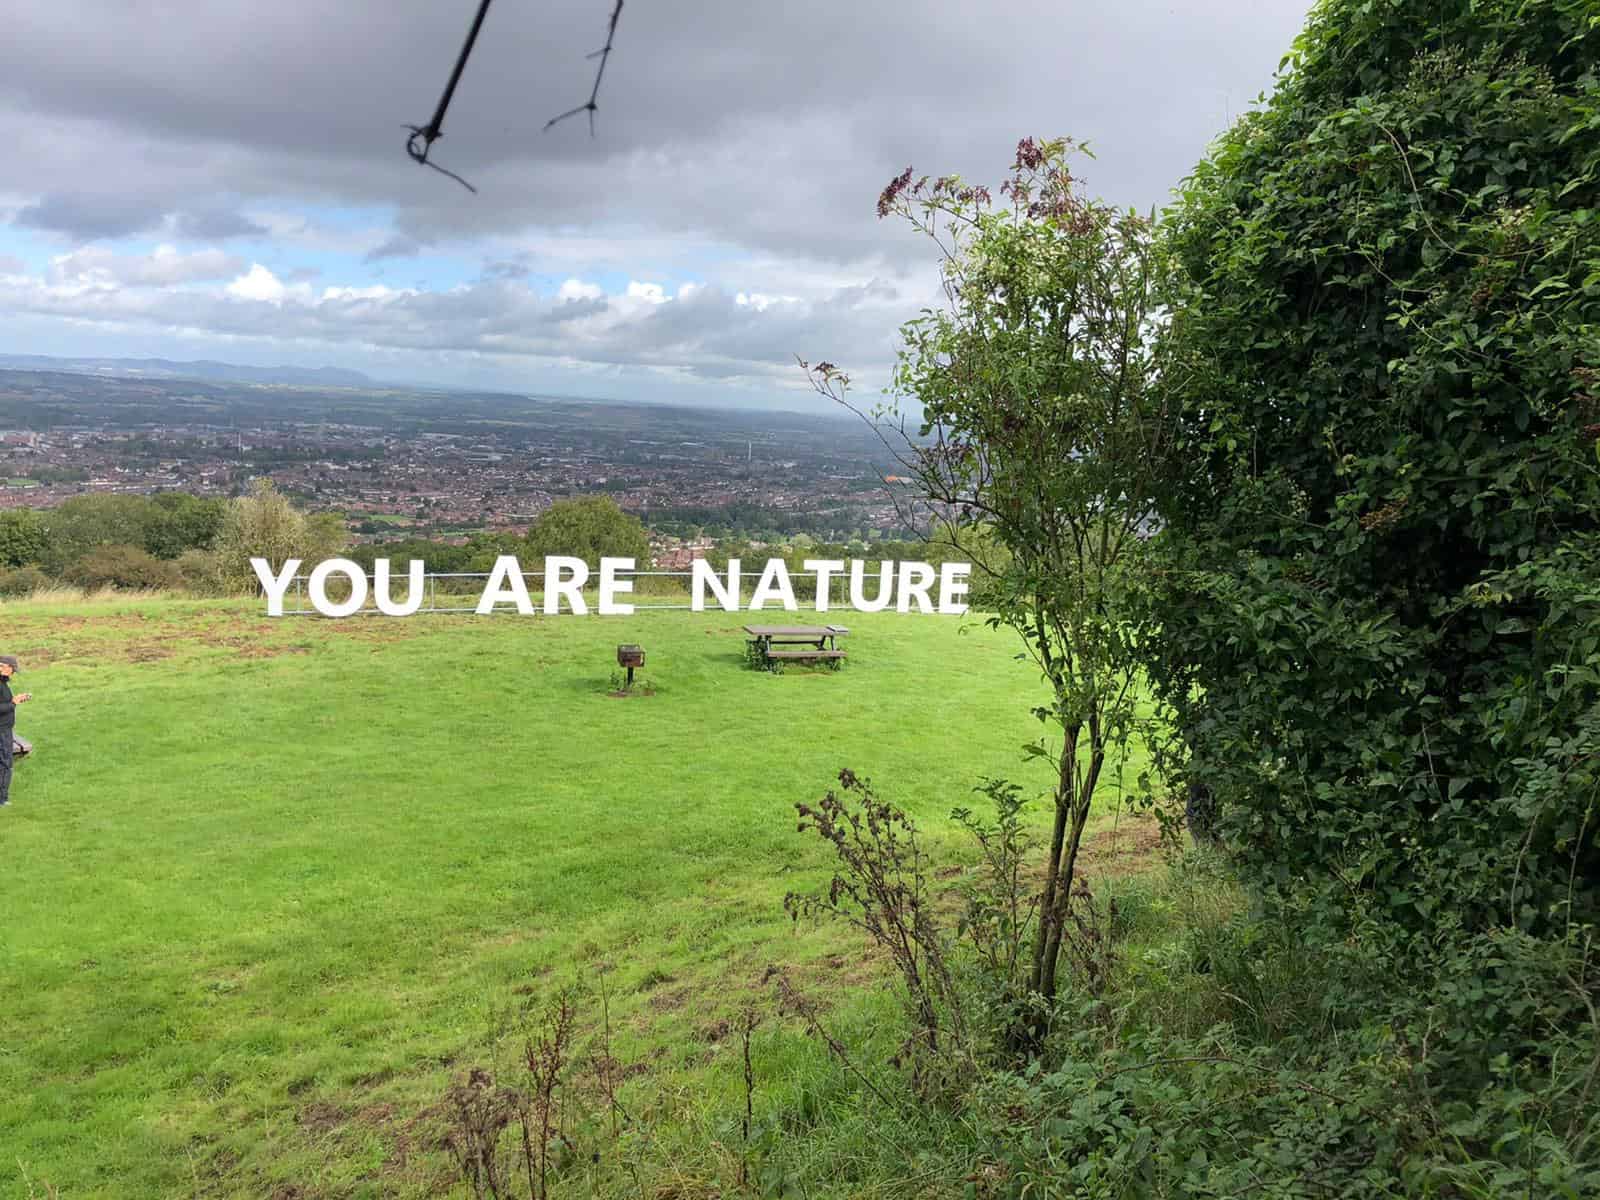 'You Are Nature' Large Letters on Robinswood Hill